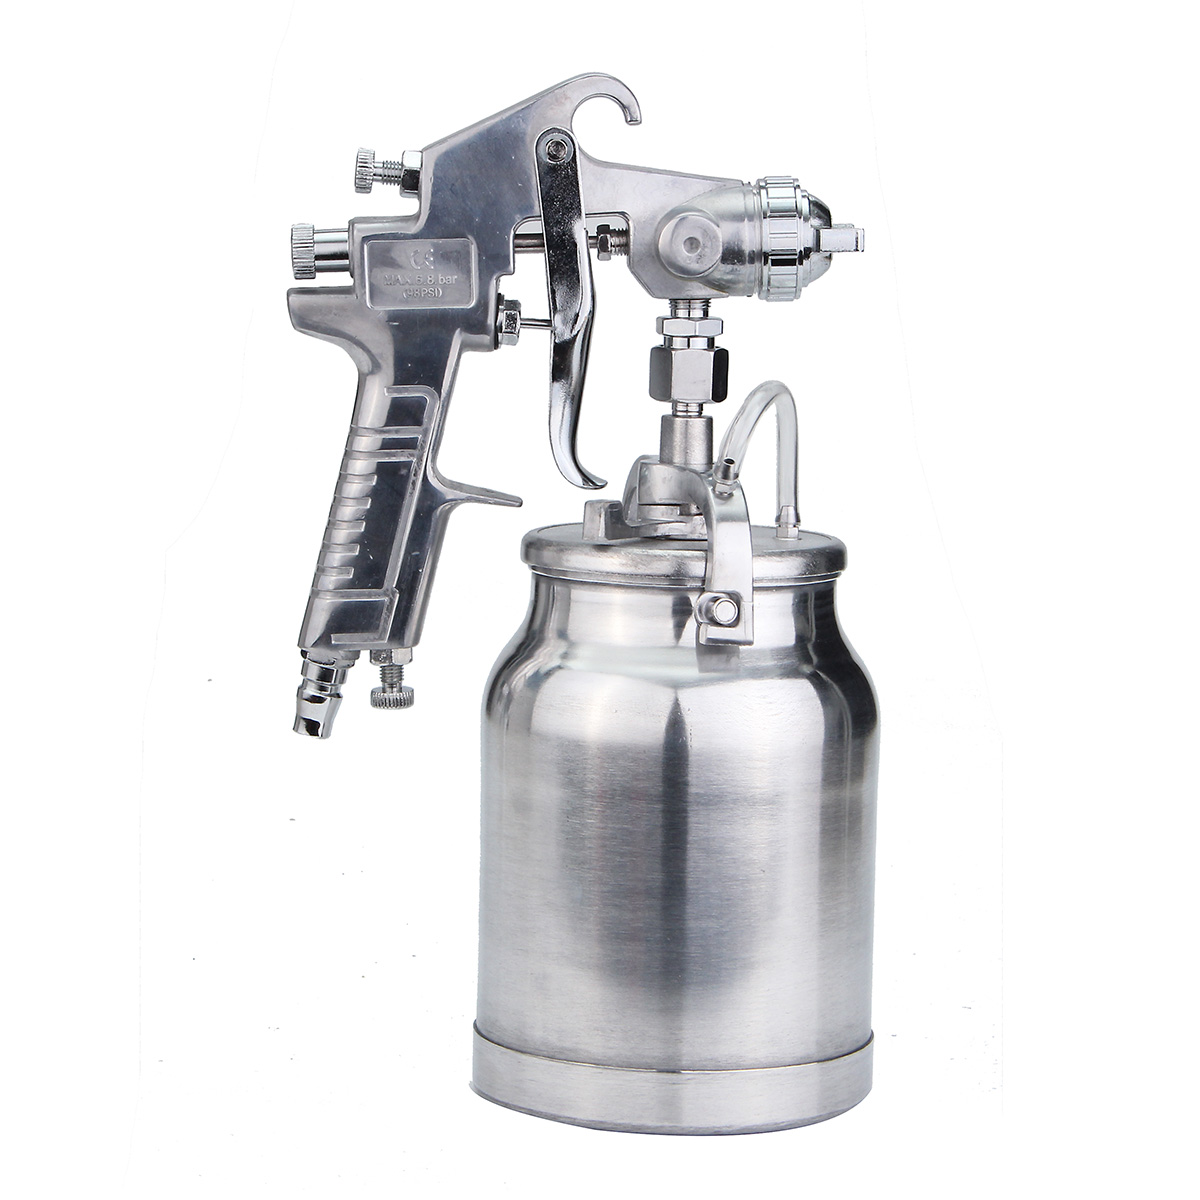 3-In-1-Suction-Feed-Heavy-Duty-Paint-Spray-Sprayer-1L-Pot-14Inch-Air-Hose-Fitting-1264292-4